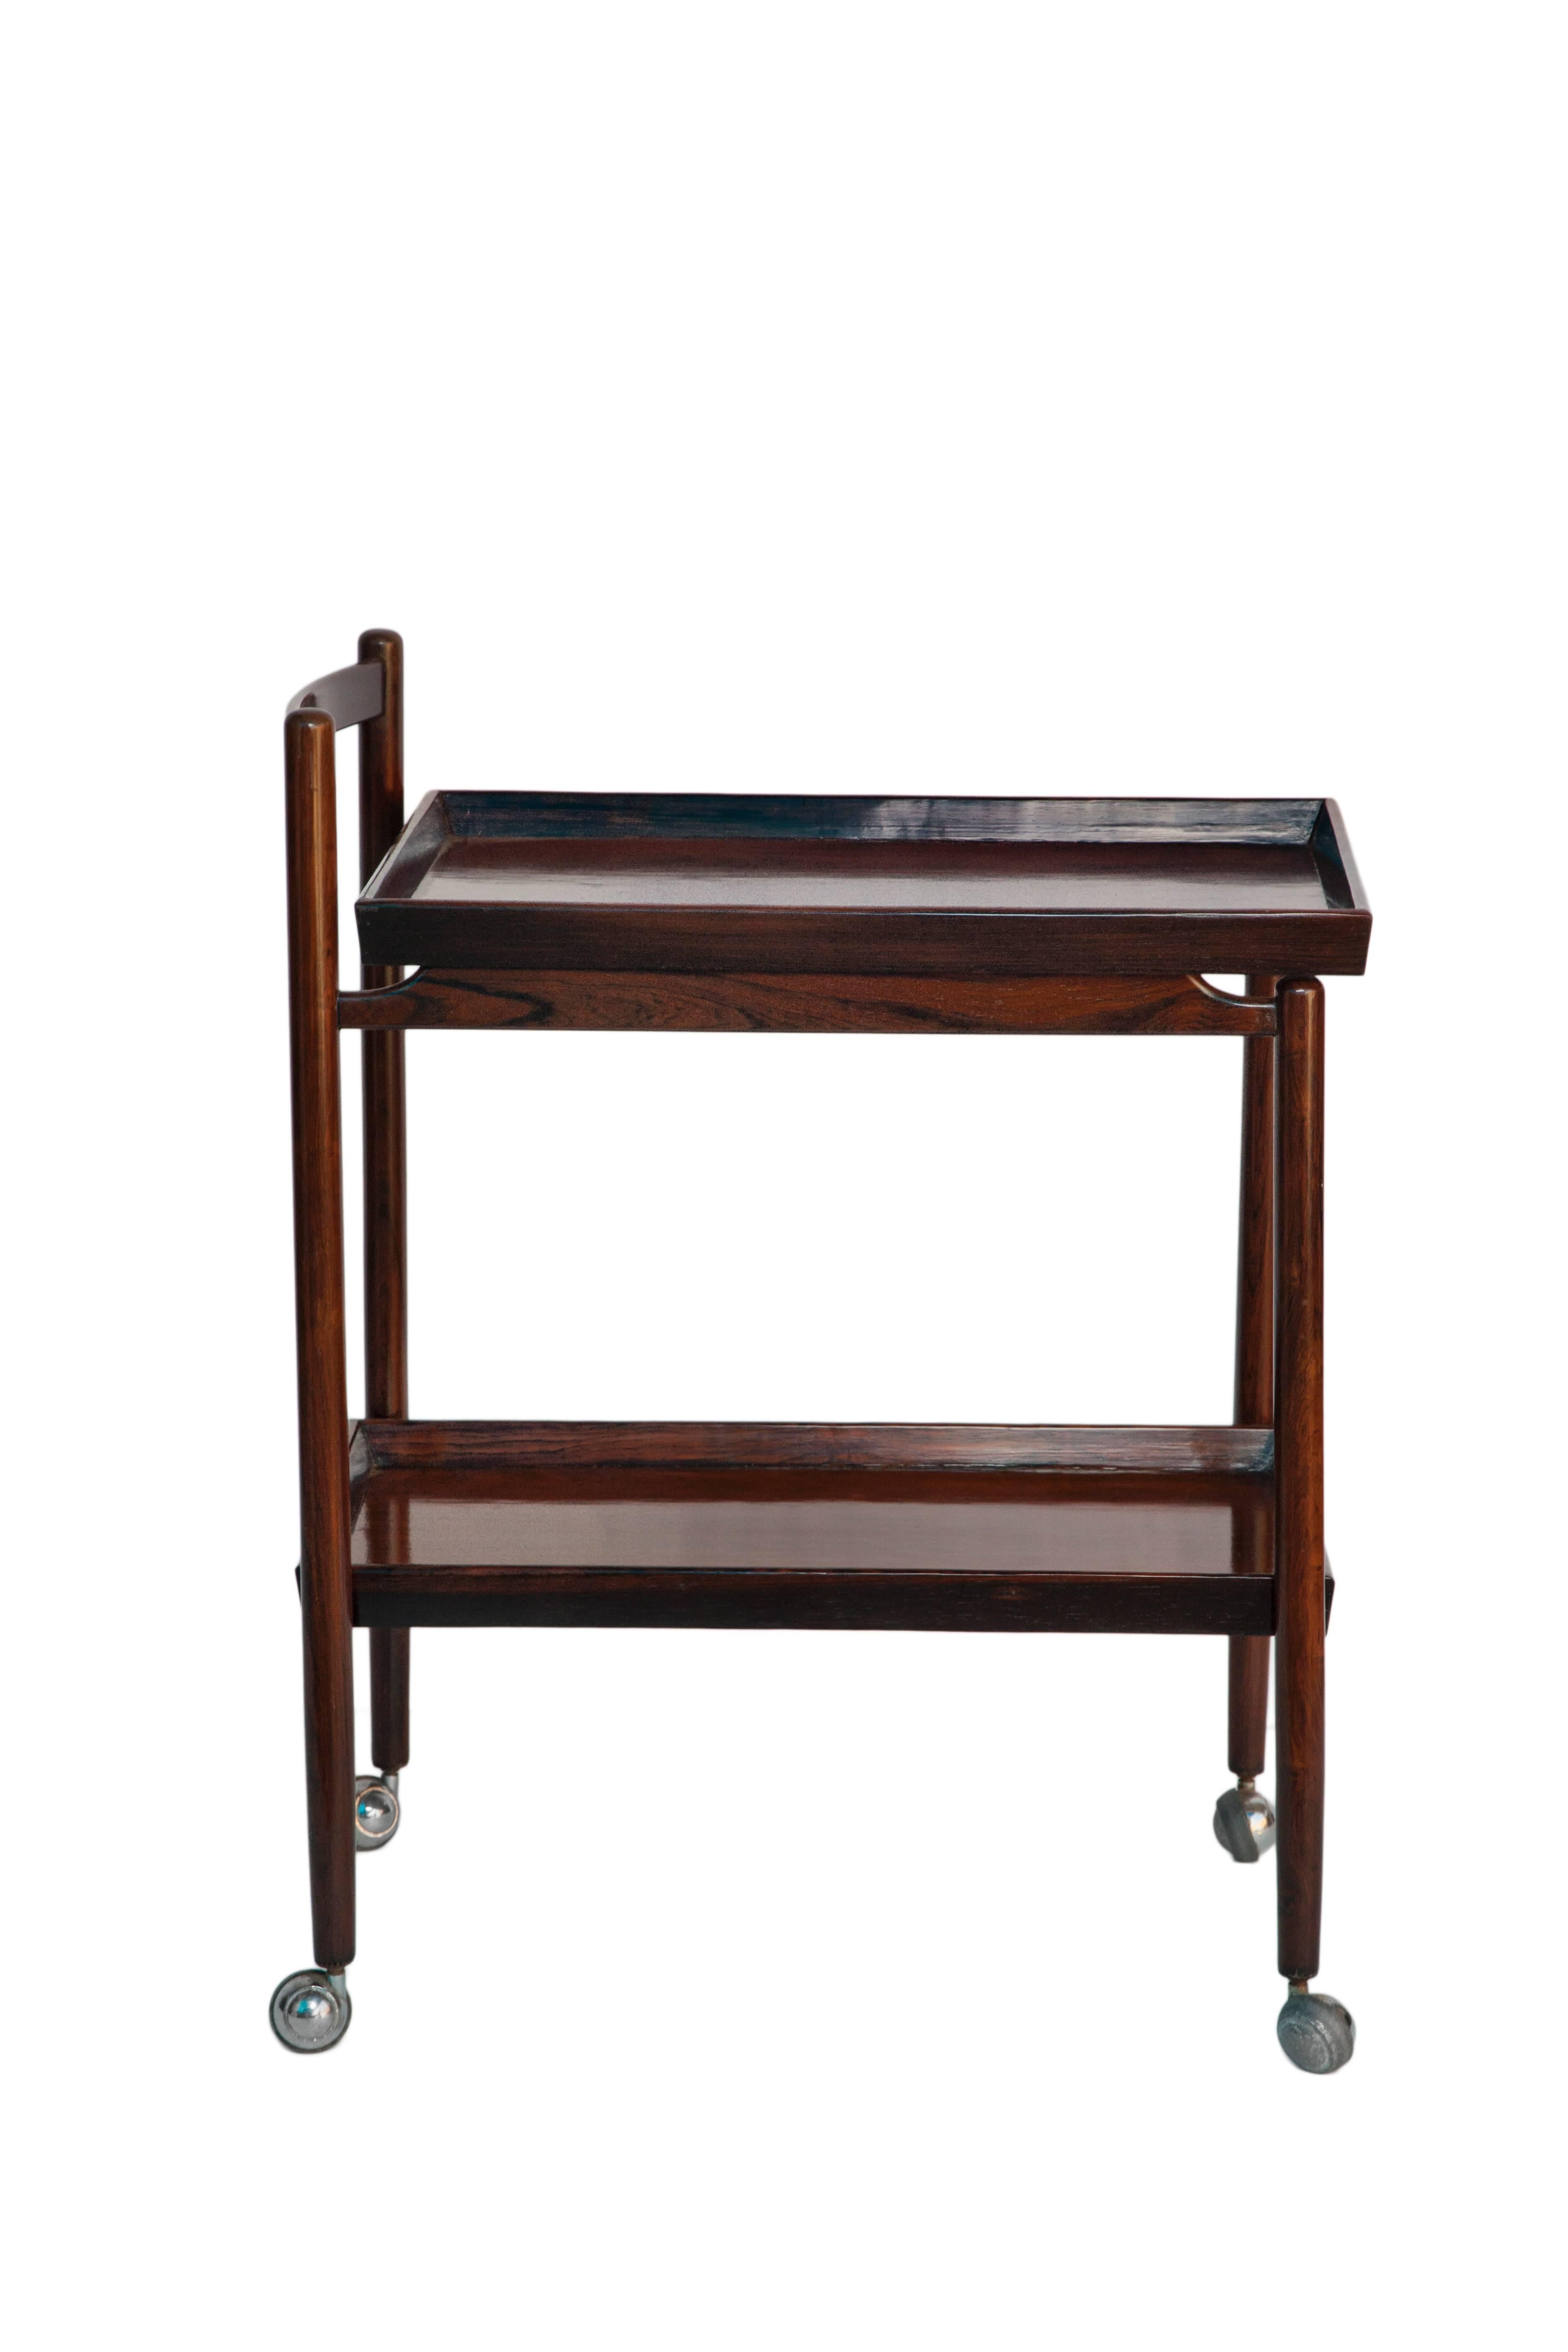 A 1960s two-tier bar cart by designer Sergio Rodrigues, entirely in rich Brazilian wood, on metal caster wheels. Top tray is removable. Excellent vintage condition, with minuscule patina to metal, consistent with age.